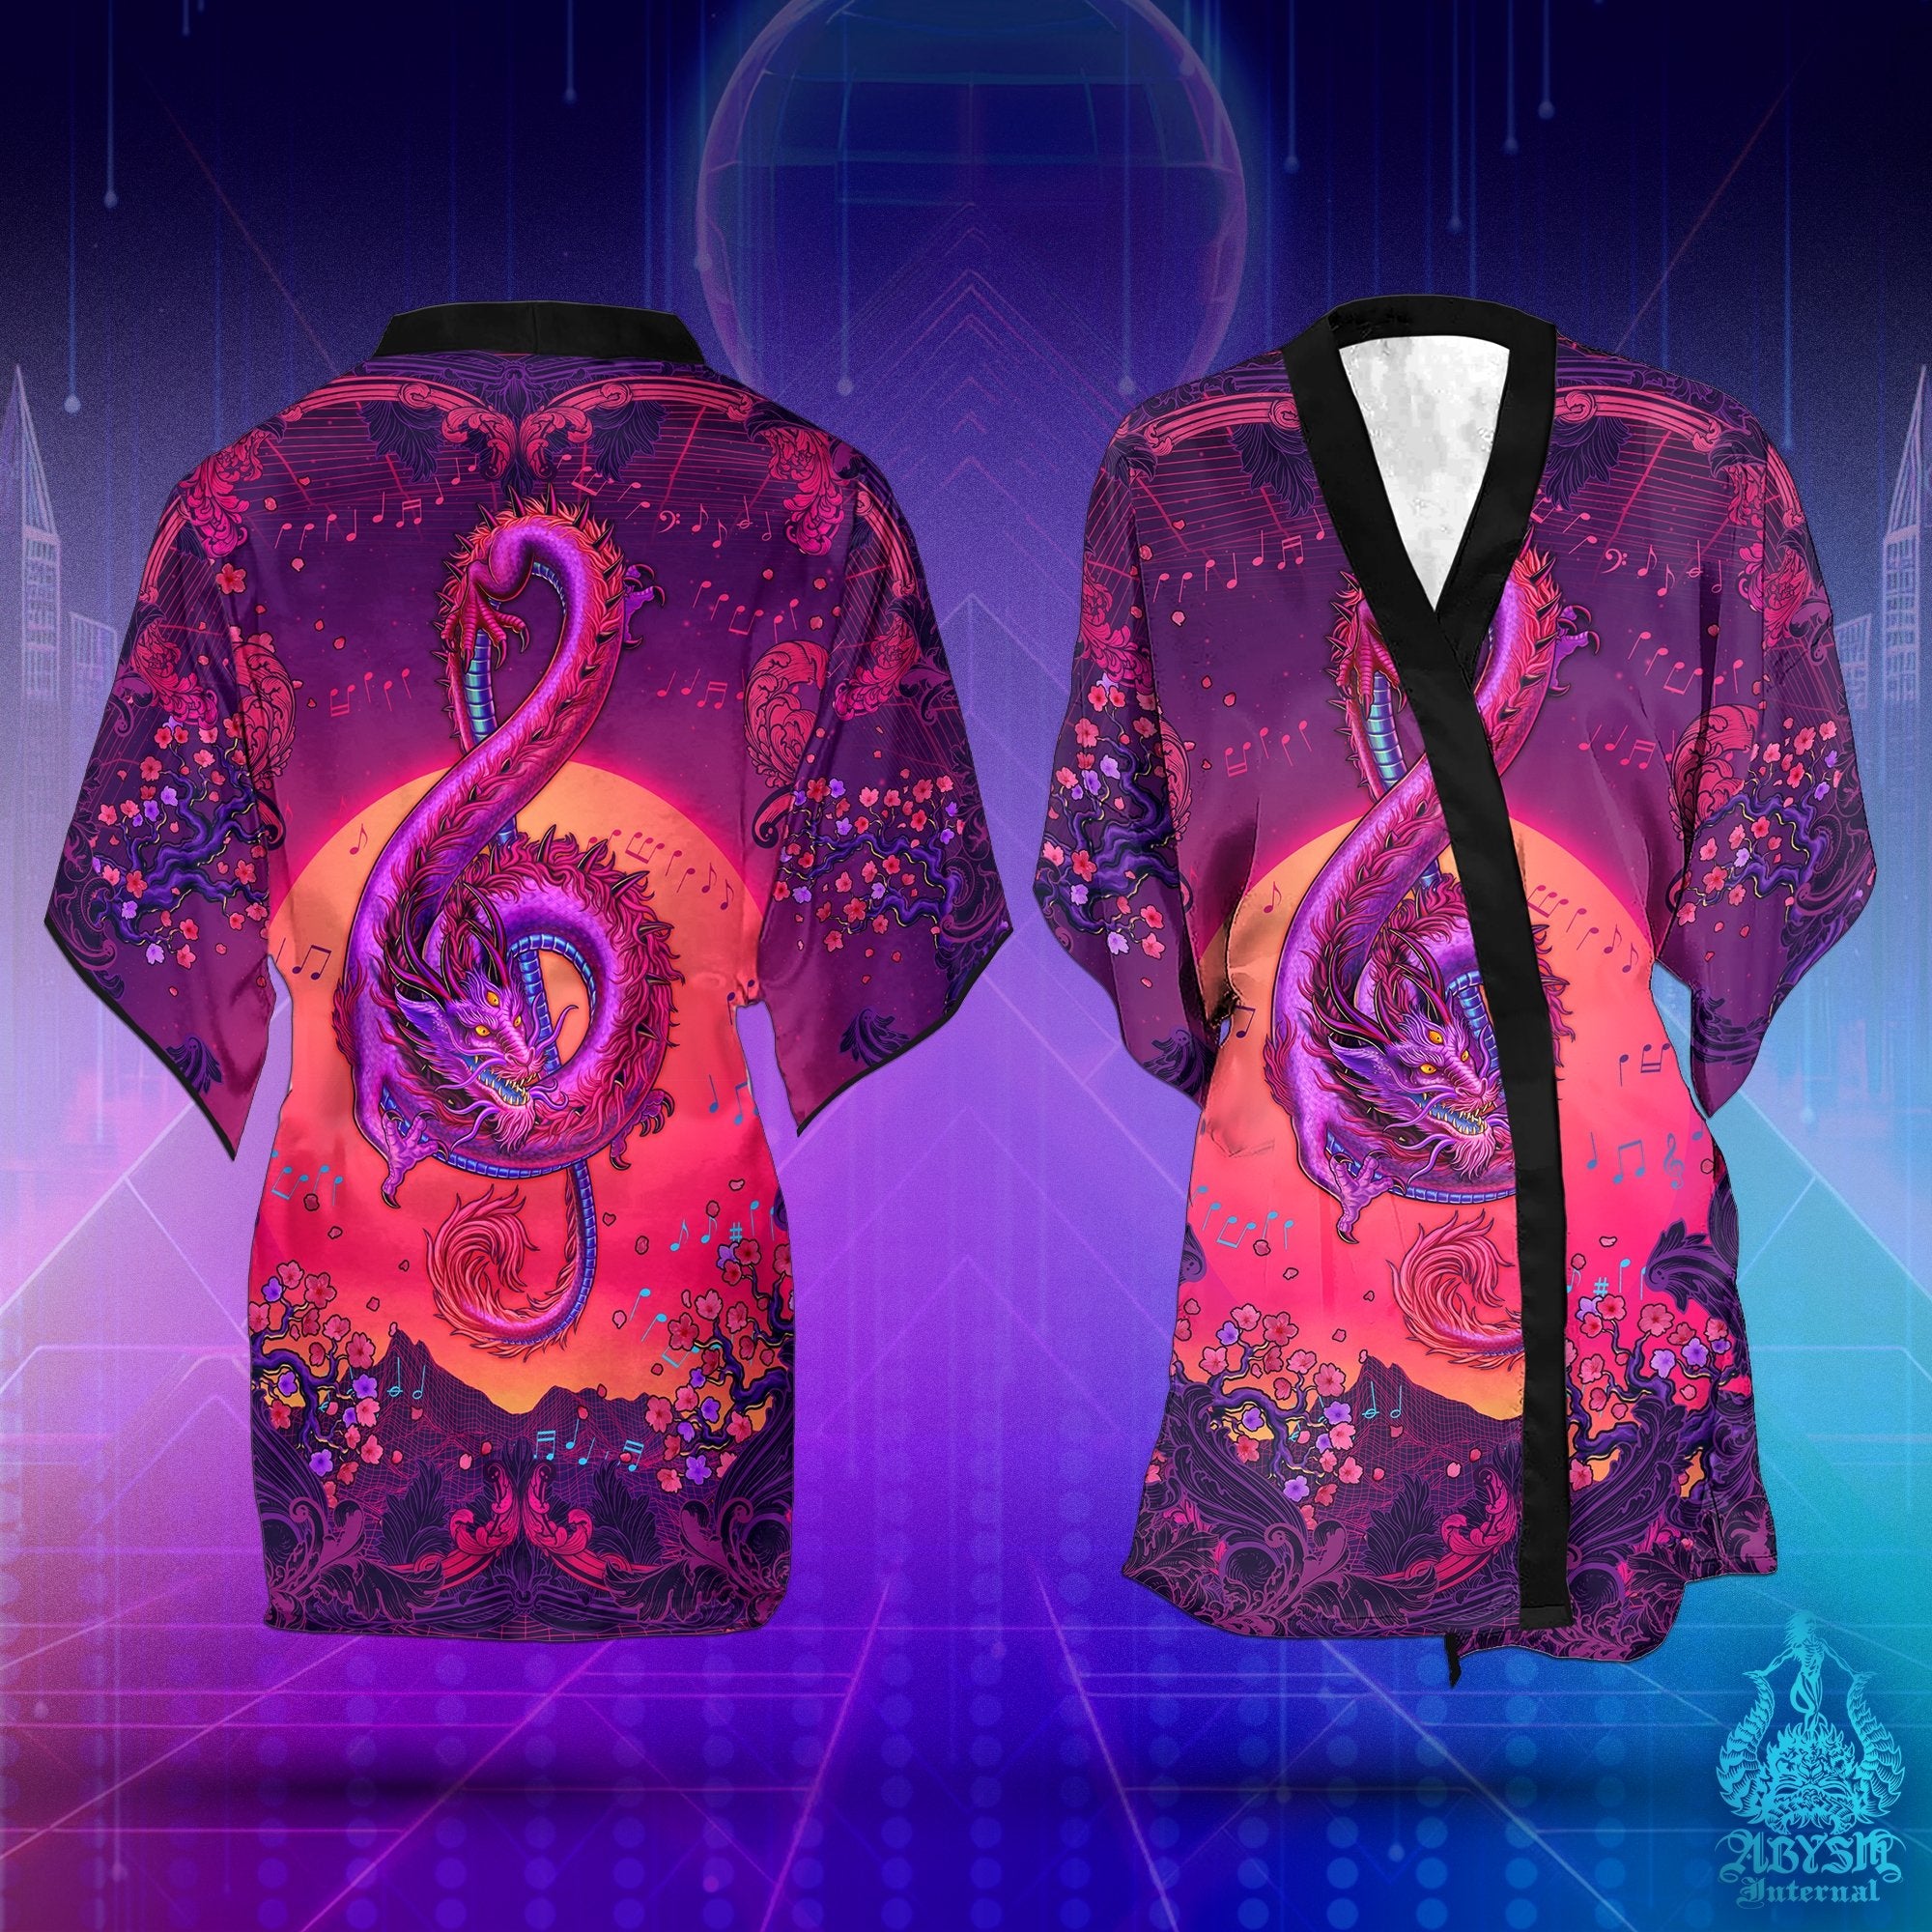 Music Festival Cover Up, Synthwave Outfit, Retrowave Party Kimono, Summer Robe, 80s Art, Alternative Vaporwave Clothing, Unisex - Dragon - Abysm Internal